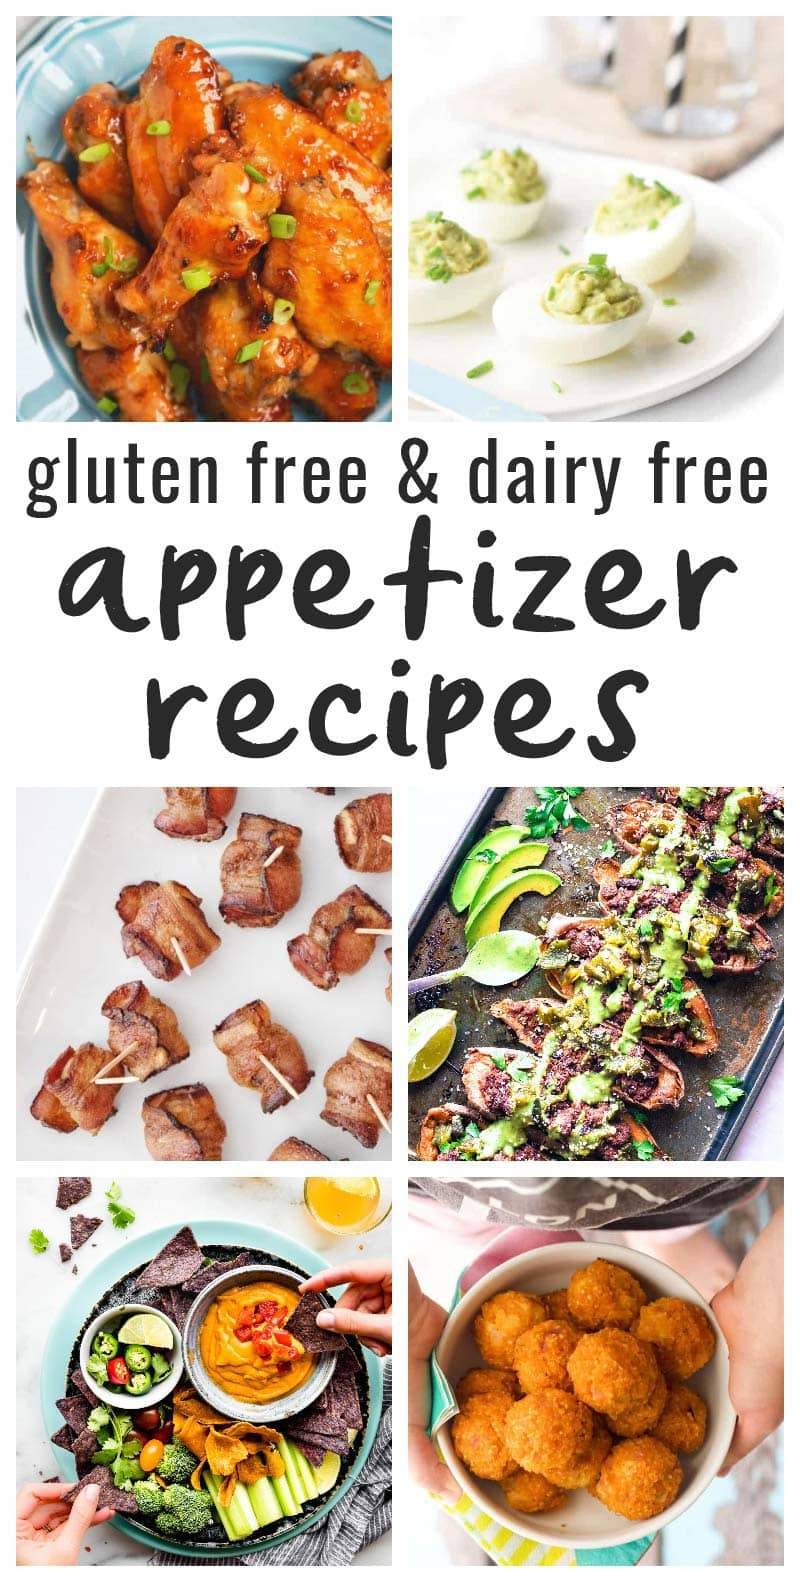 Dairy Free Appetizers
 45 Dairy Free and Gluten Free Appetizers • The Fit Cookie